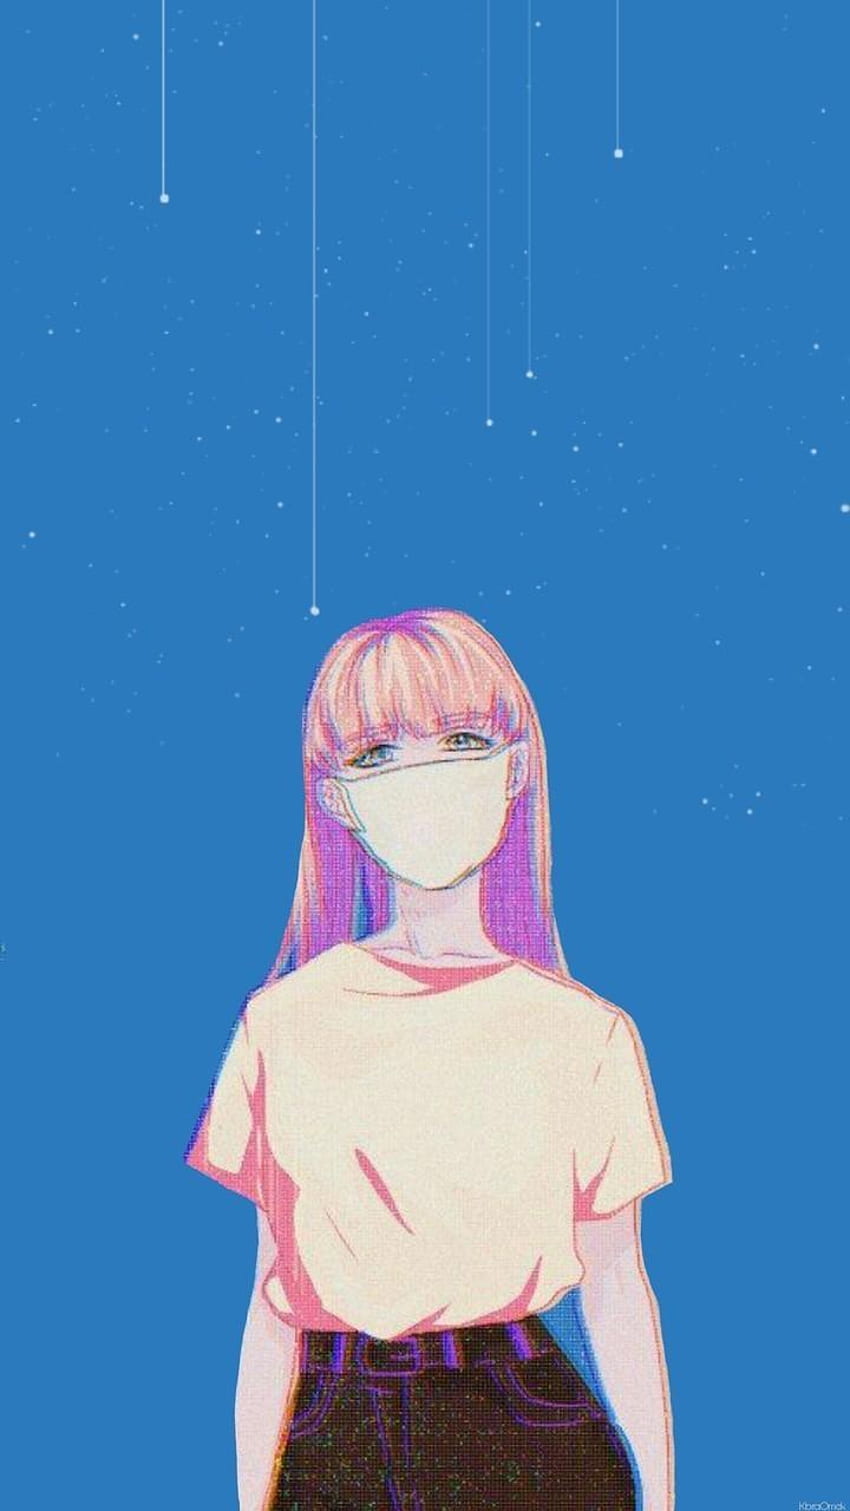 Download Pink Aesthetic Anime Phone Neon City Wallpaper | Wallpapers.com